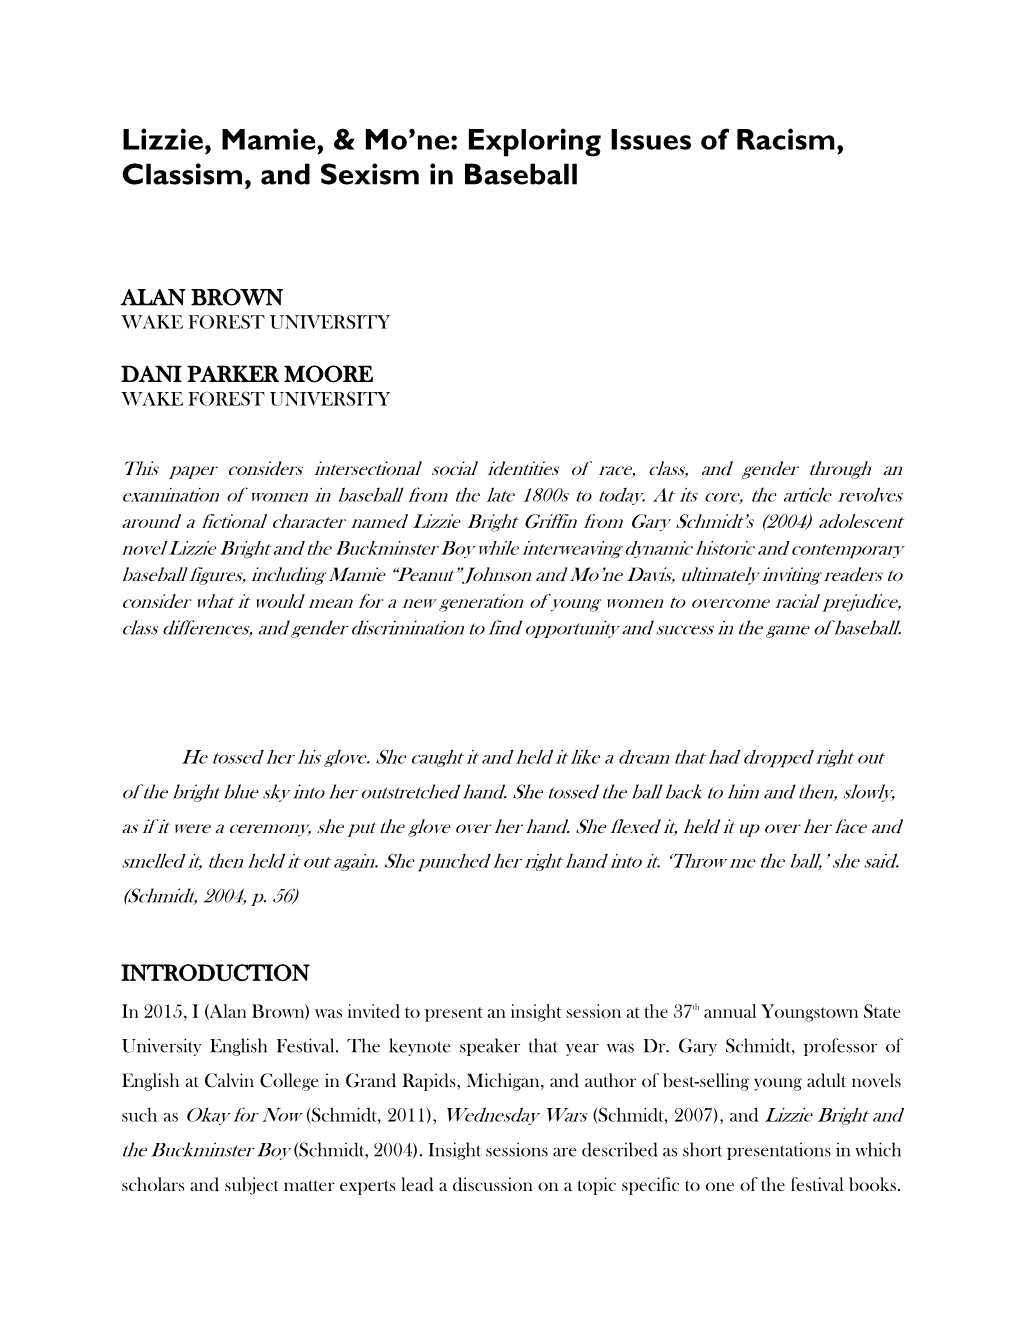 Lizzie, Mamie, & Mo'ne: Exploring Issues of Racism, Classism, and Sexism in Baseball